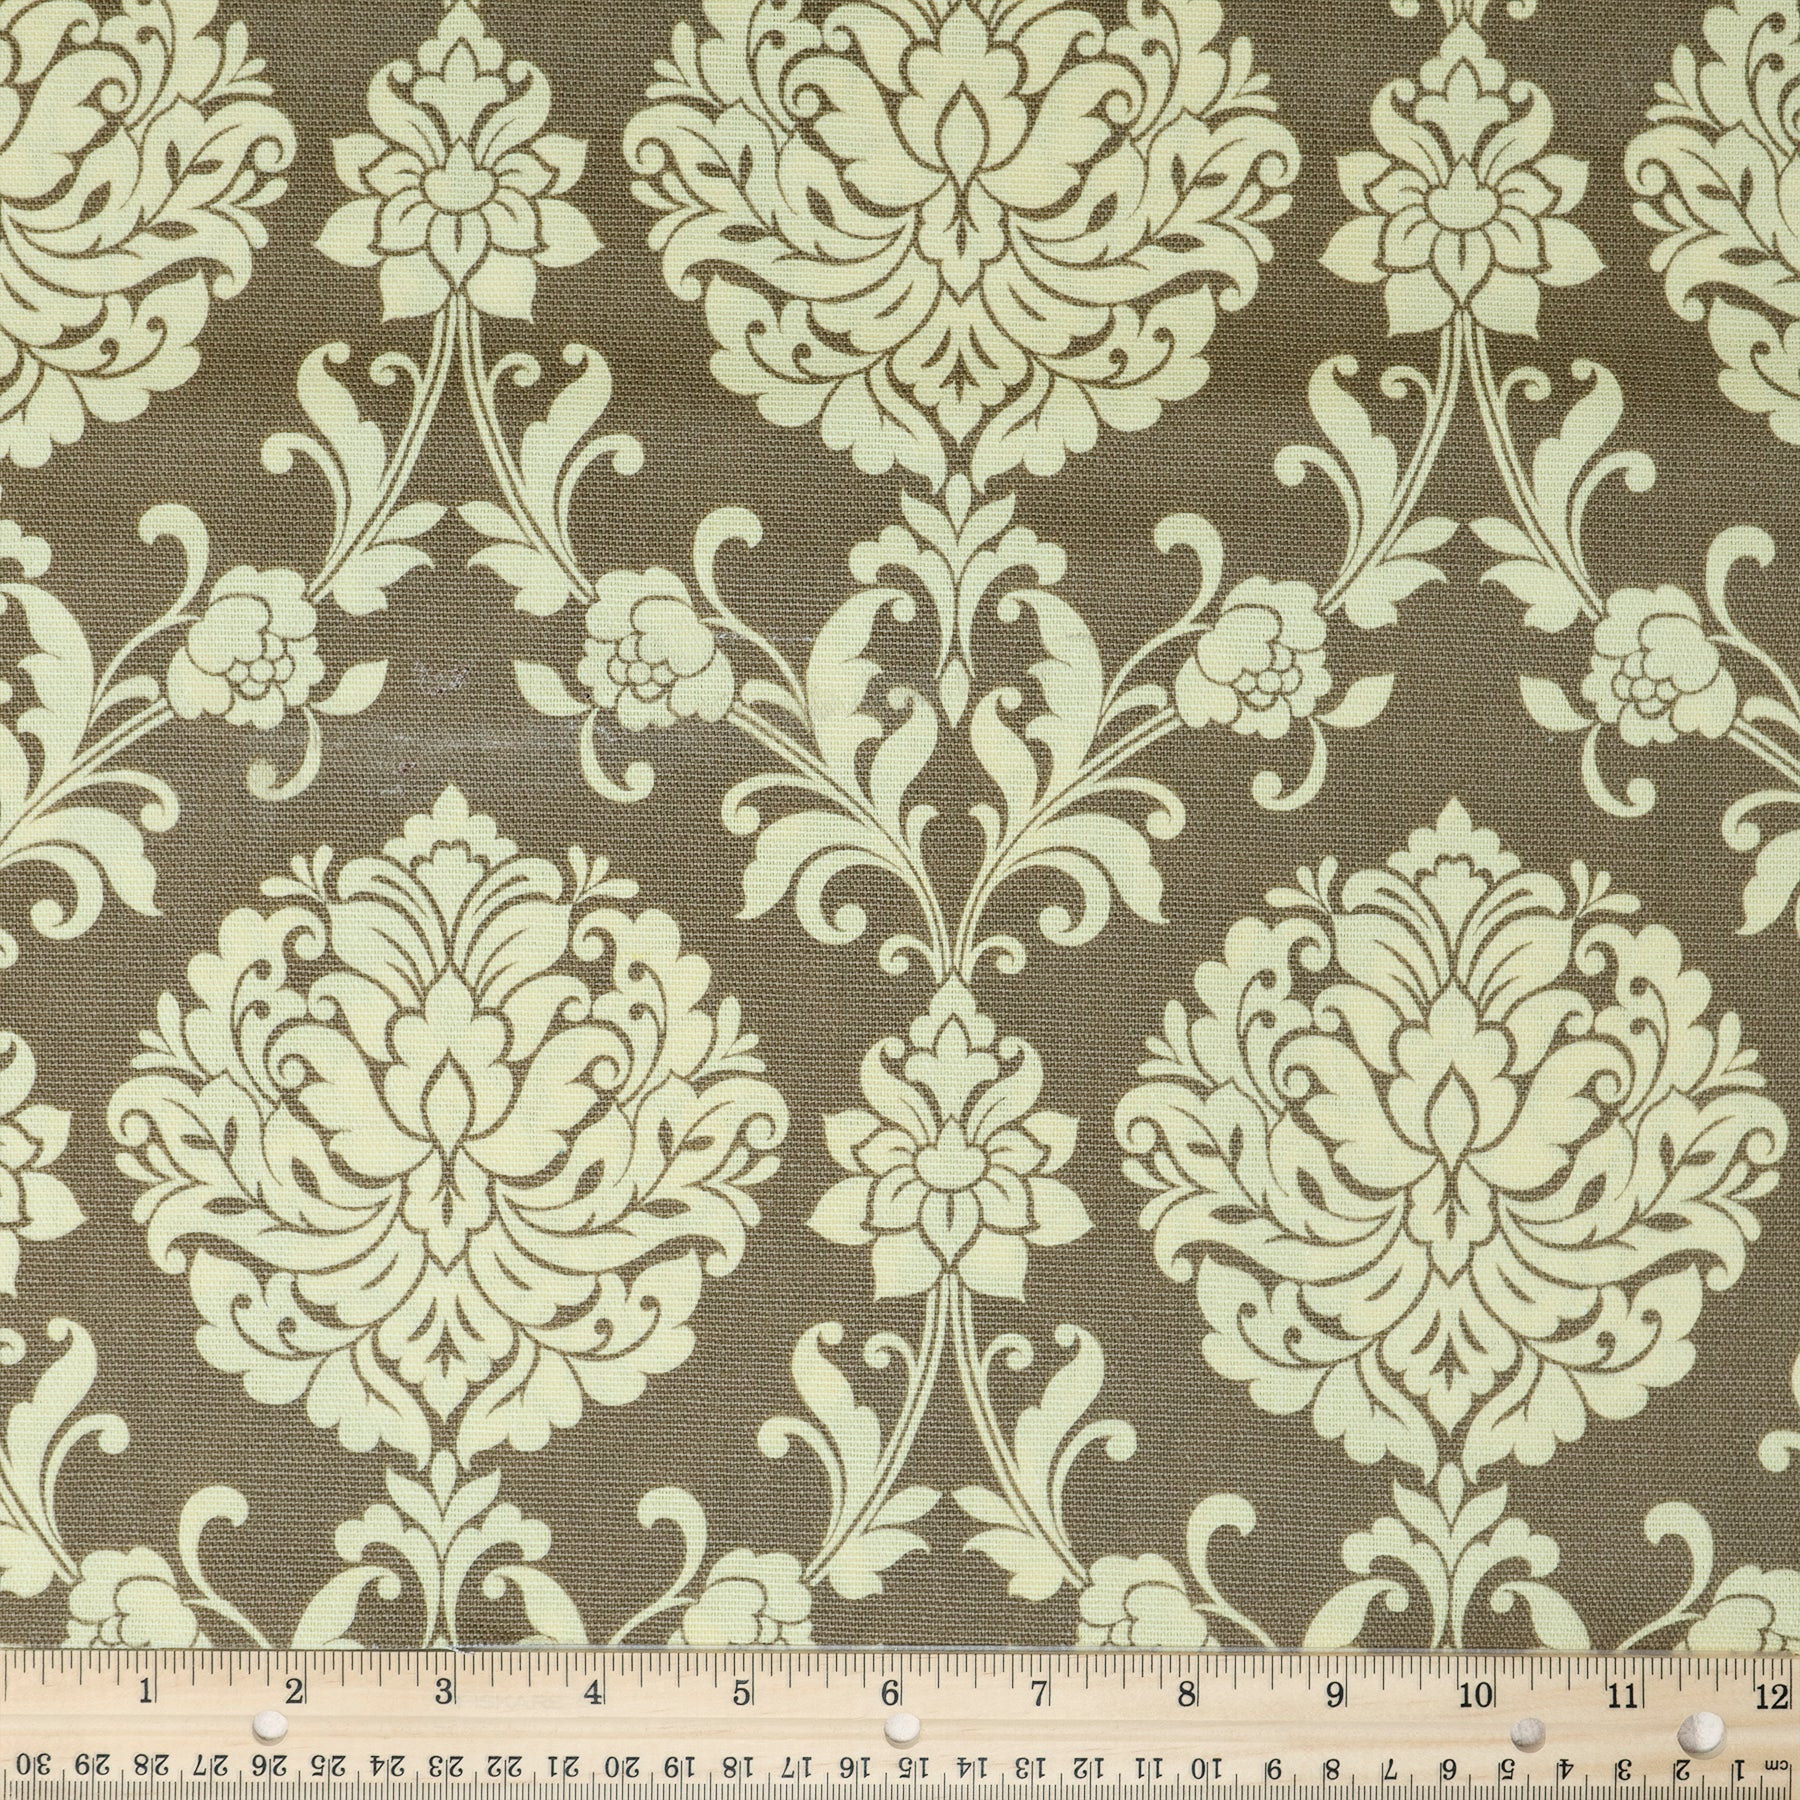 Waverly Inspirations 100% Cotton Duck 45" Width Small Damask Cocoa Color Sewing Fabric by the Yard